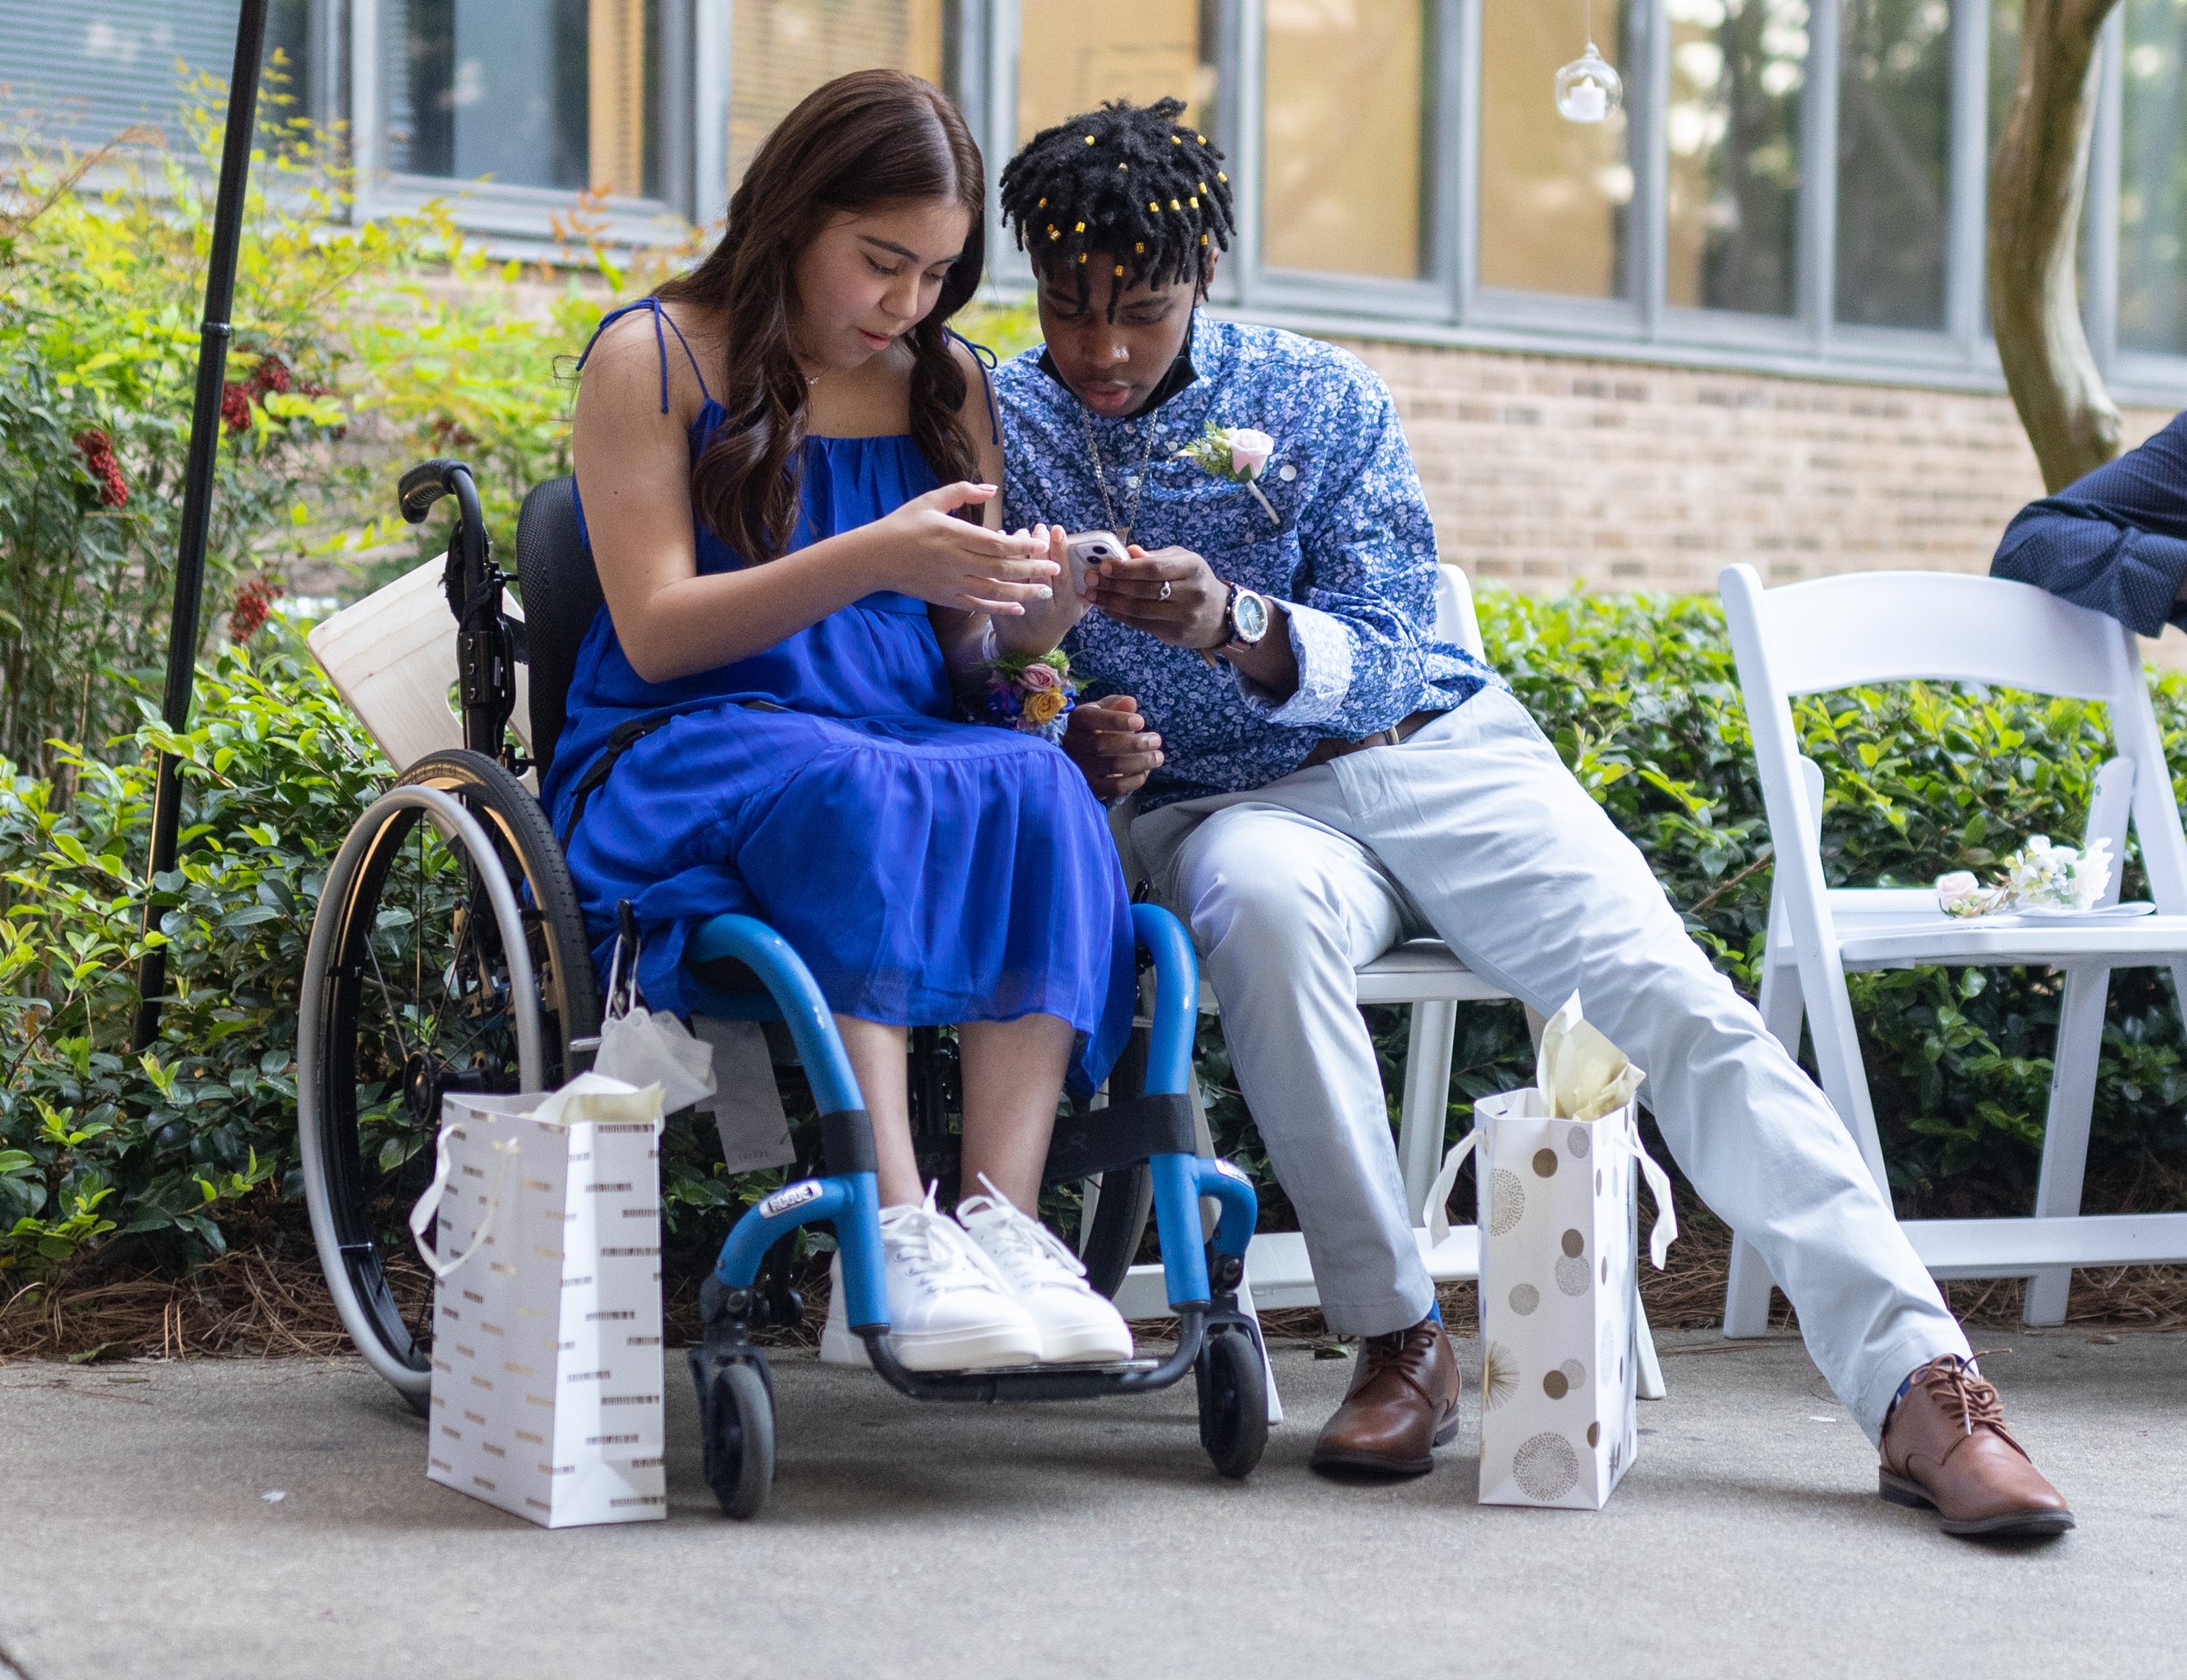  Shepherd Center patients Maria Manley, left, and Dontae Wilson watch a video on a phone during Enchanted Garden, a prom night held for patients at the Shepherd Center on Friday, April 22, 2022, in Atlanta. Branden Camp/For the Atlanta Journal-Consti